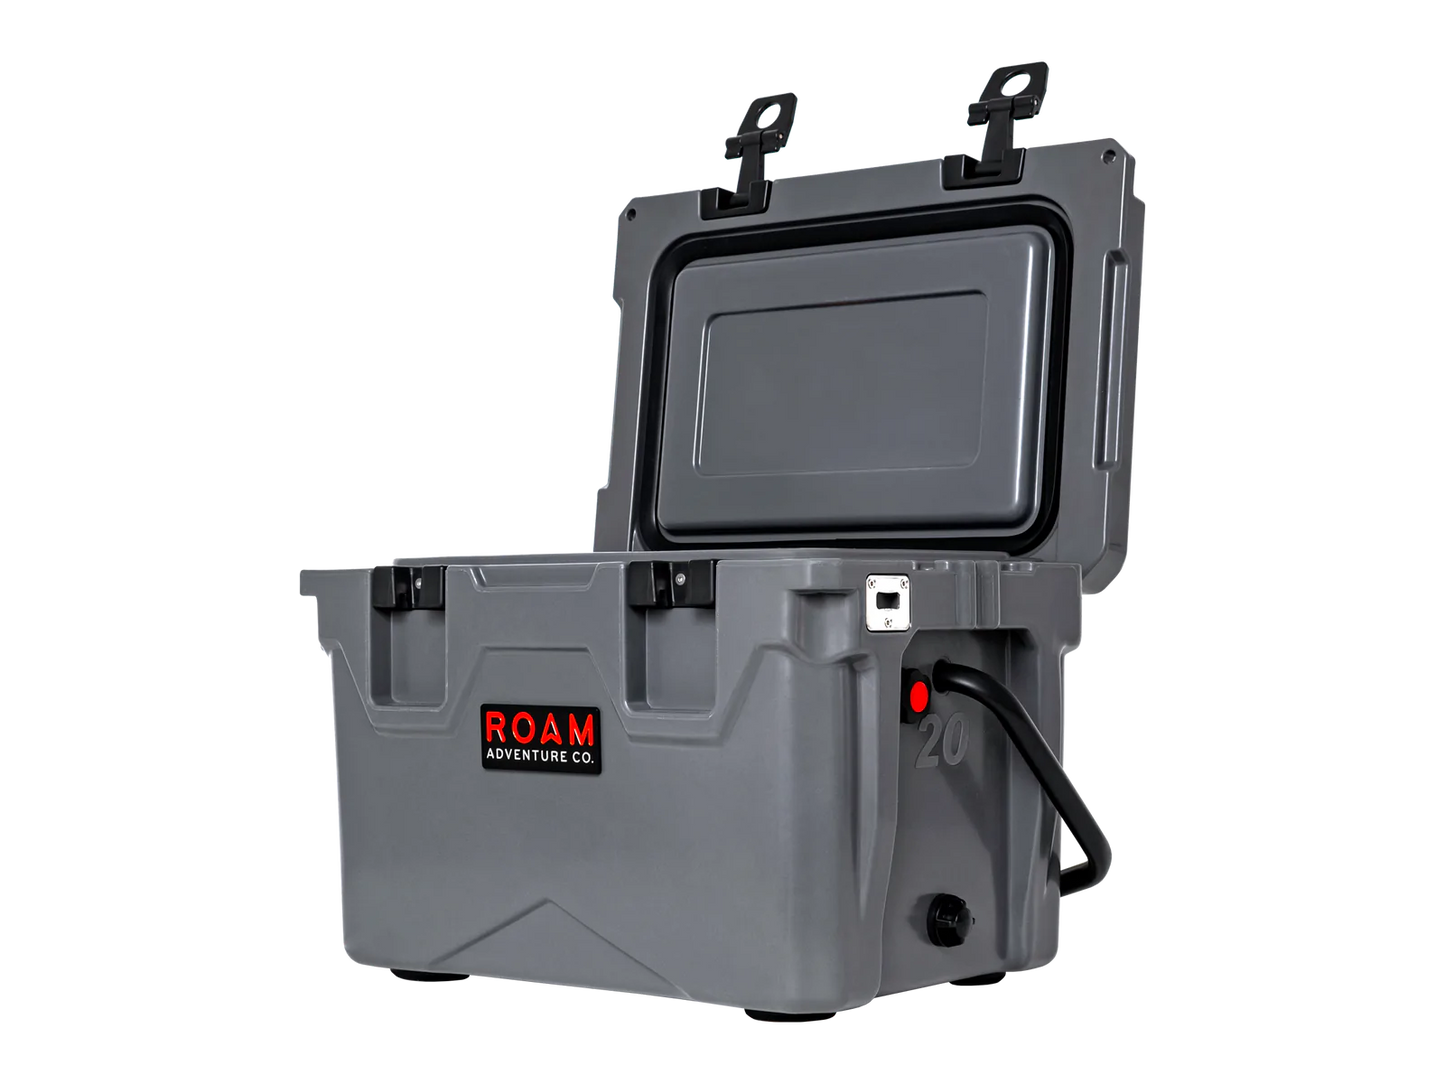 roam adventure co rugged icechest cooler for sale near waco texas at hawkes outdoors 2102512882